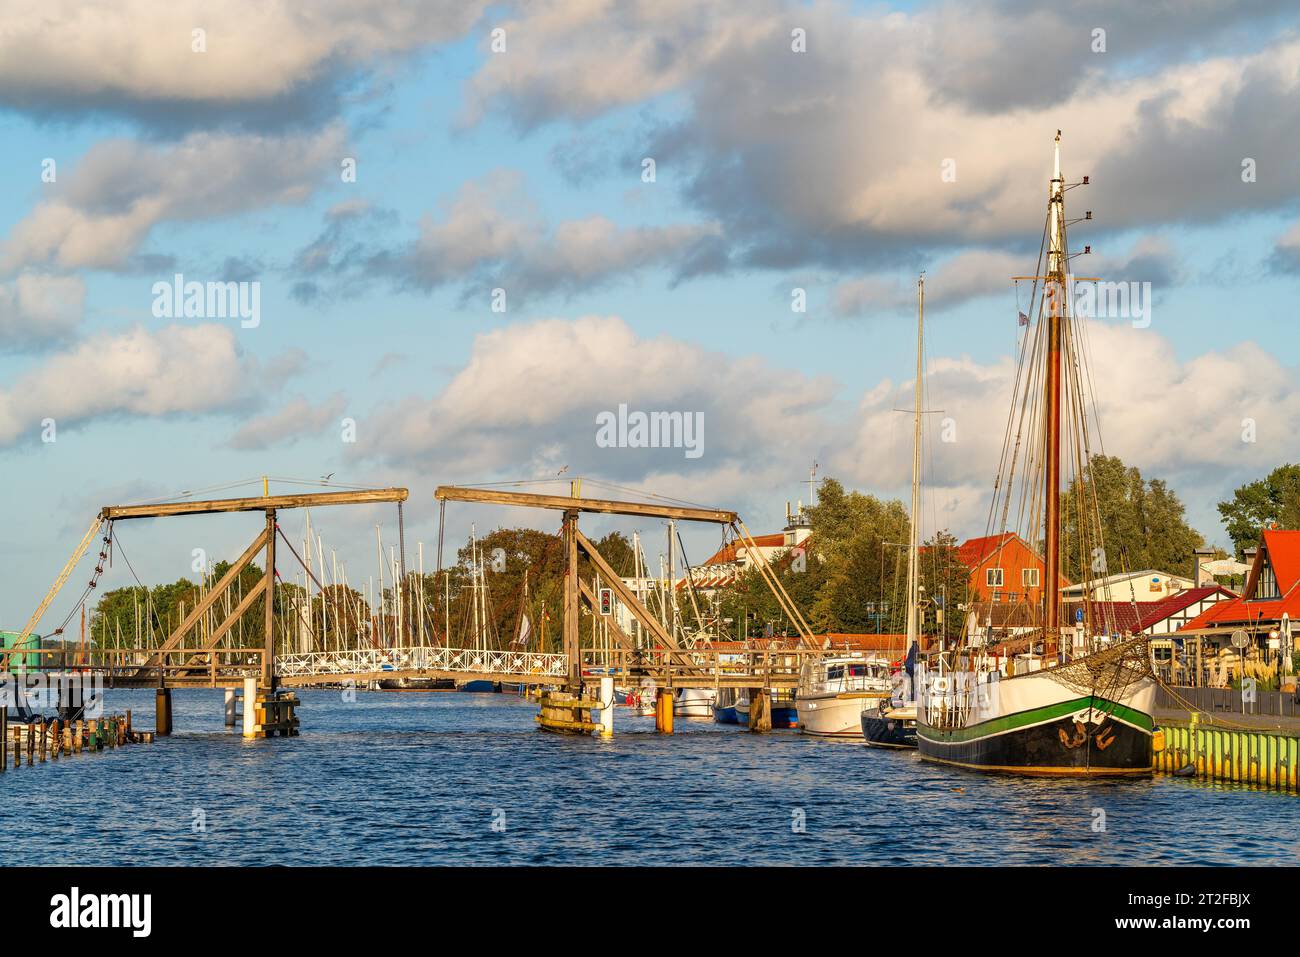 Historic Wieck wooden bascule bridge over the river Ryck and sailing ships in the harbour, Wieck fishing village, Greifswald, Mecklenburg-Western Stock Photo